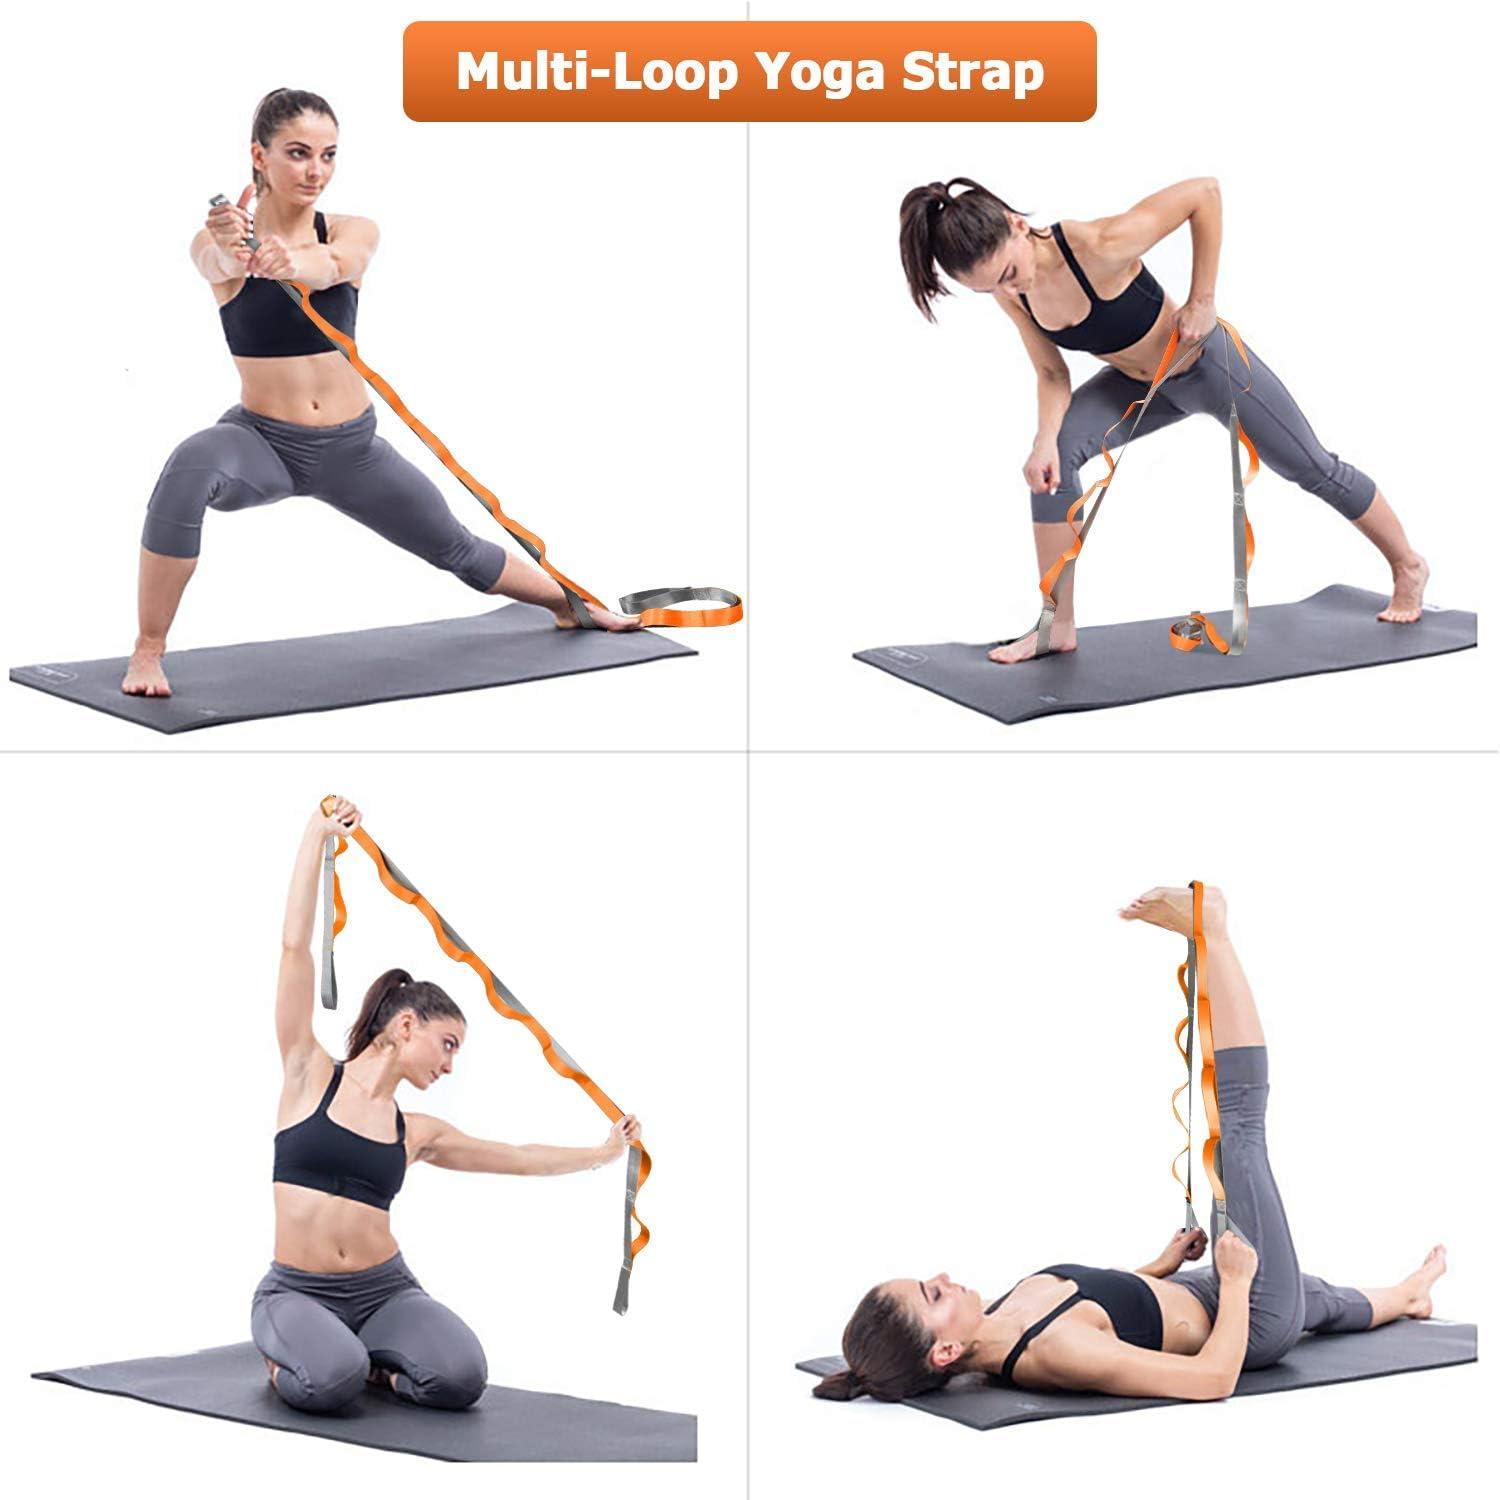 Yoga Straps for Stretching - Yoga Strap, Multi-Loop Stretching Strap,  Elastic Yoga Stretch Strap, Pilates, Exercise, Dance and Gymnastics